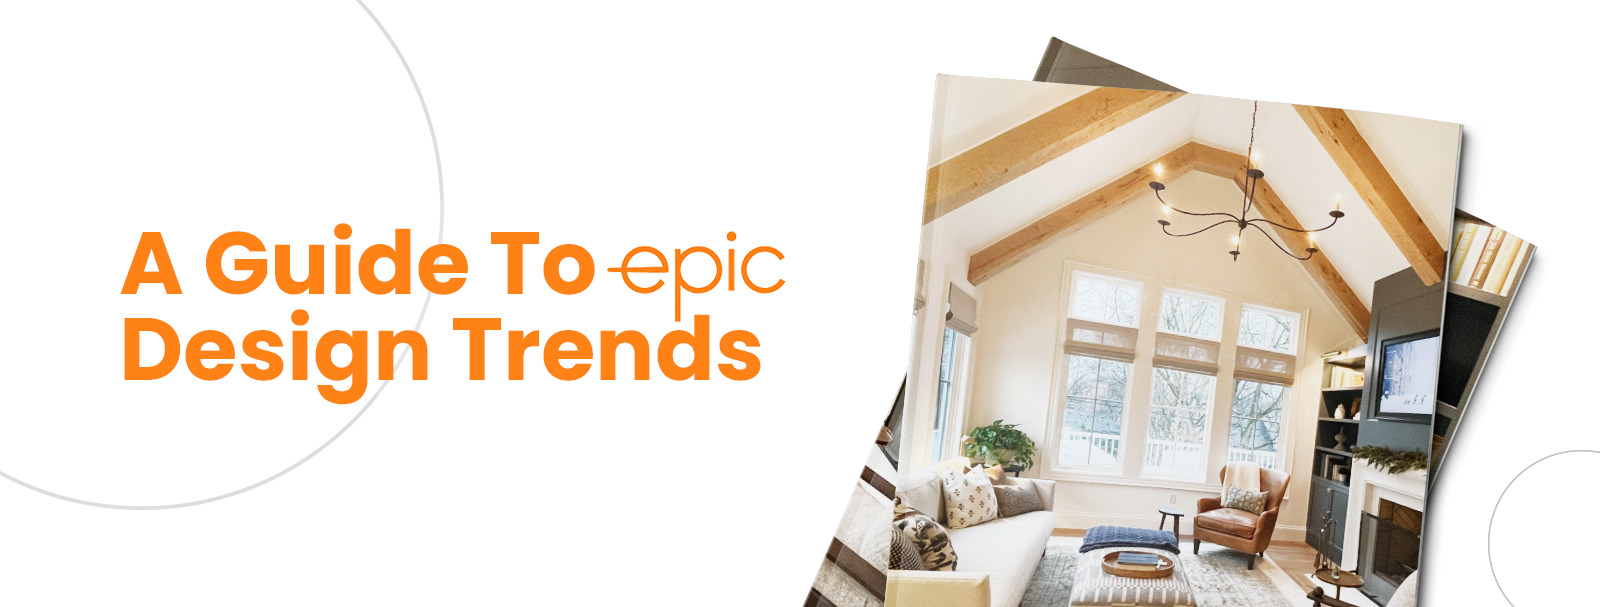 A Guide to Epic Design Trends.